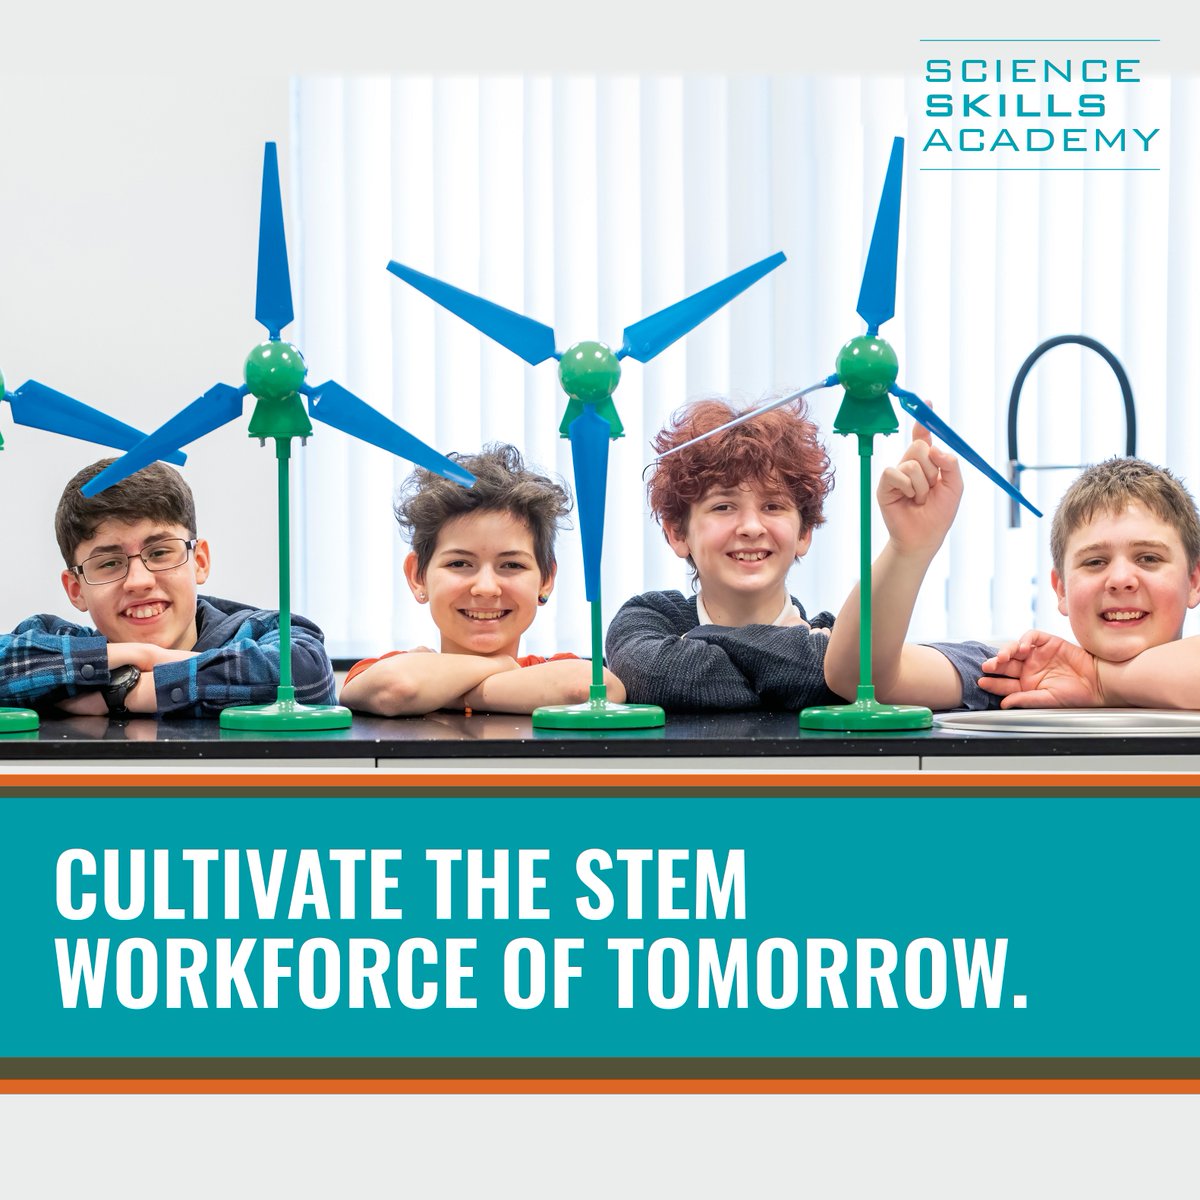 Discover the power of STEM with @SSASTEM🔬💡

The Science Skills Academy brings exciting STEM activities to young minds.

Join us in shaping the future of science, technology, engineering, and maths.

👉 ow.ly/L5St50OWRYM

@HighlandCouncil @ThinkUHI #GetInvolved #STEMSkills